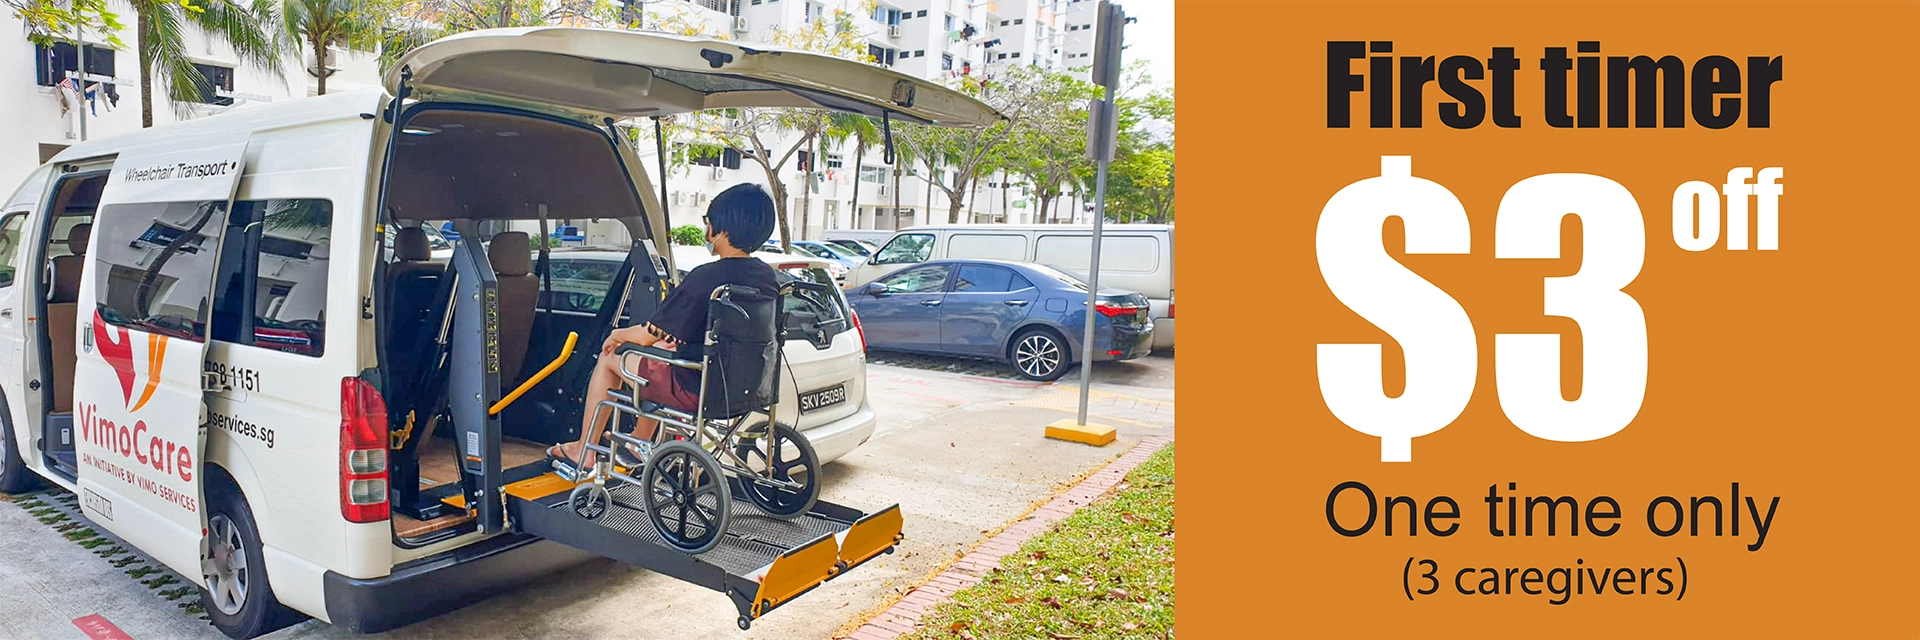 vimocare-wheelchair-transport-first-timer-3-off